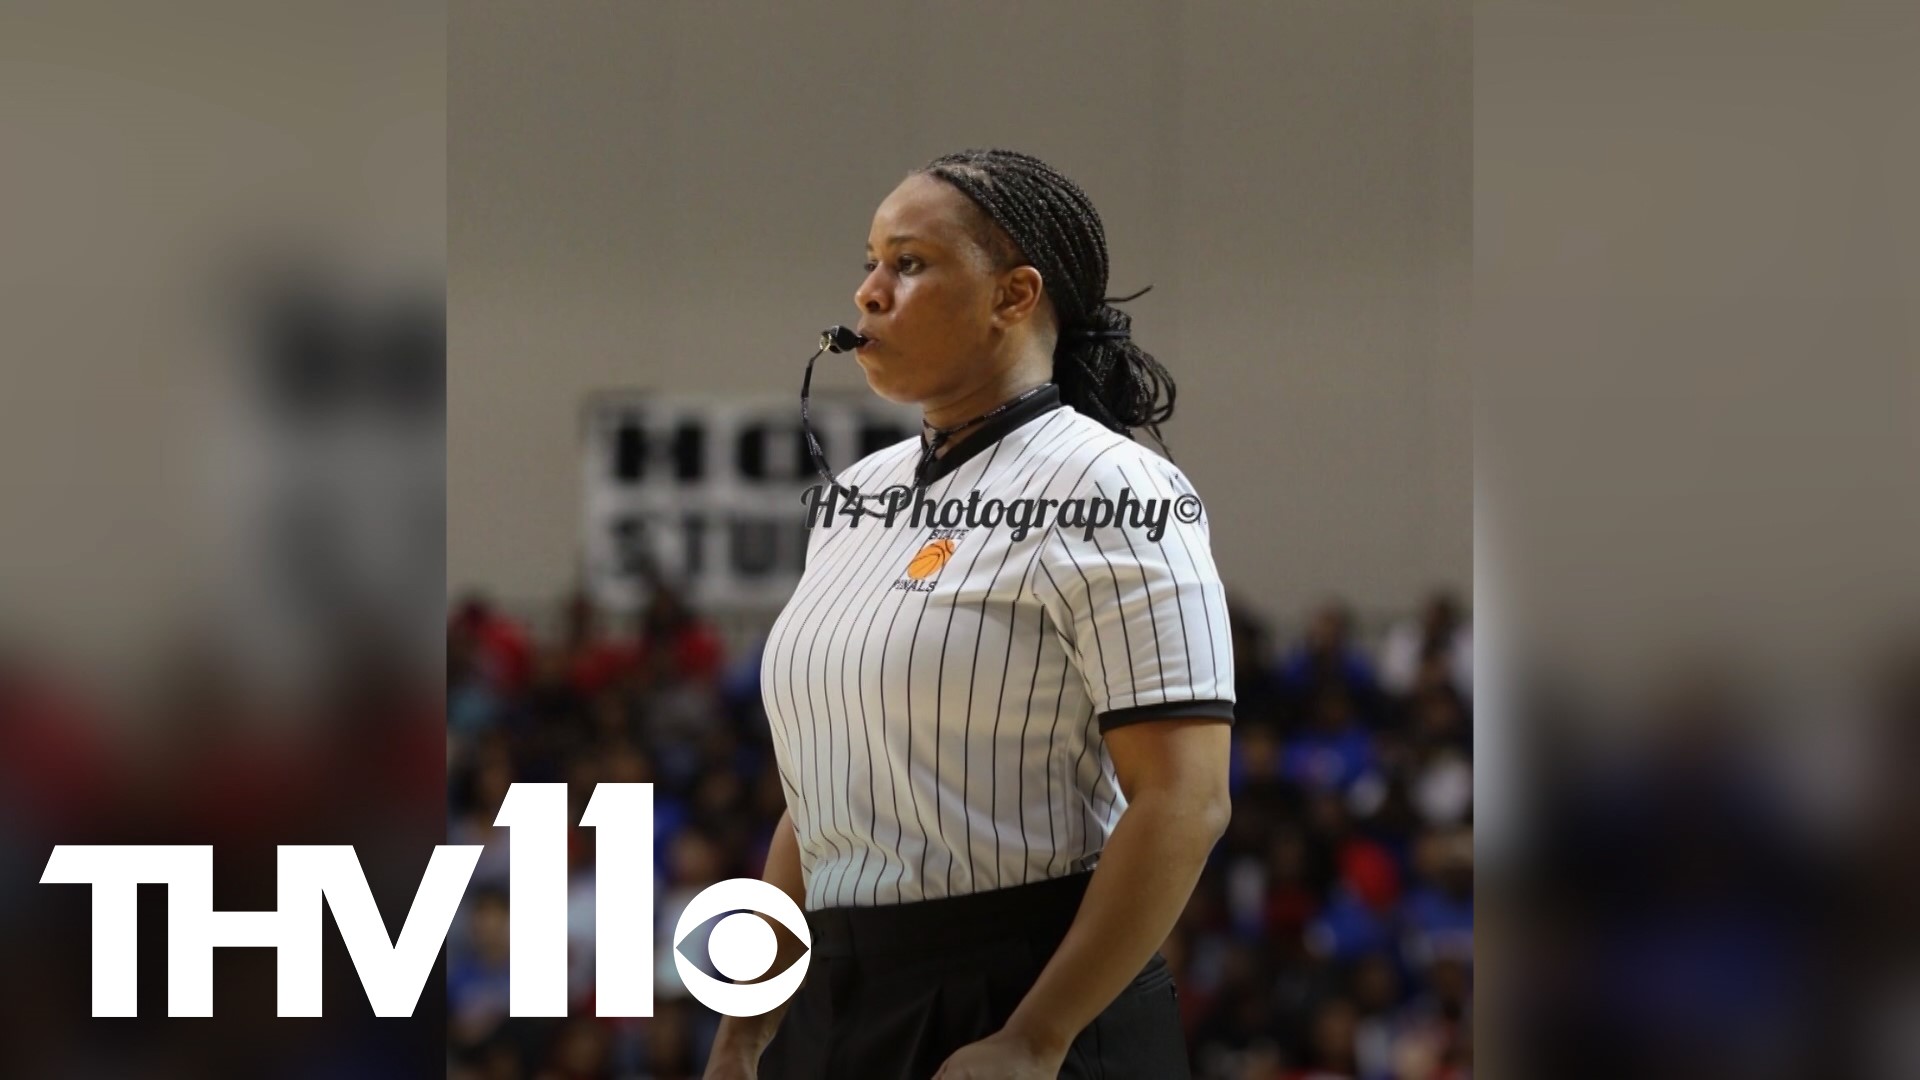 Carey Smith is breaking barriers as a woman referee here in Arkansas!